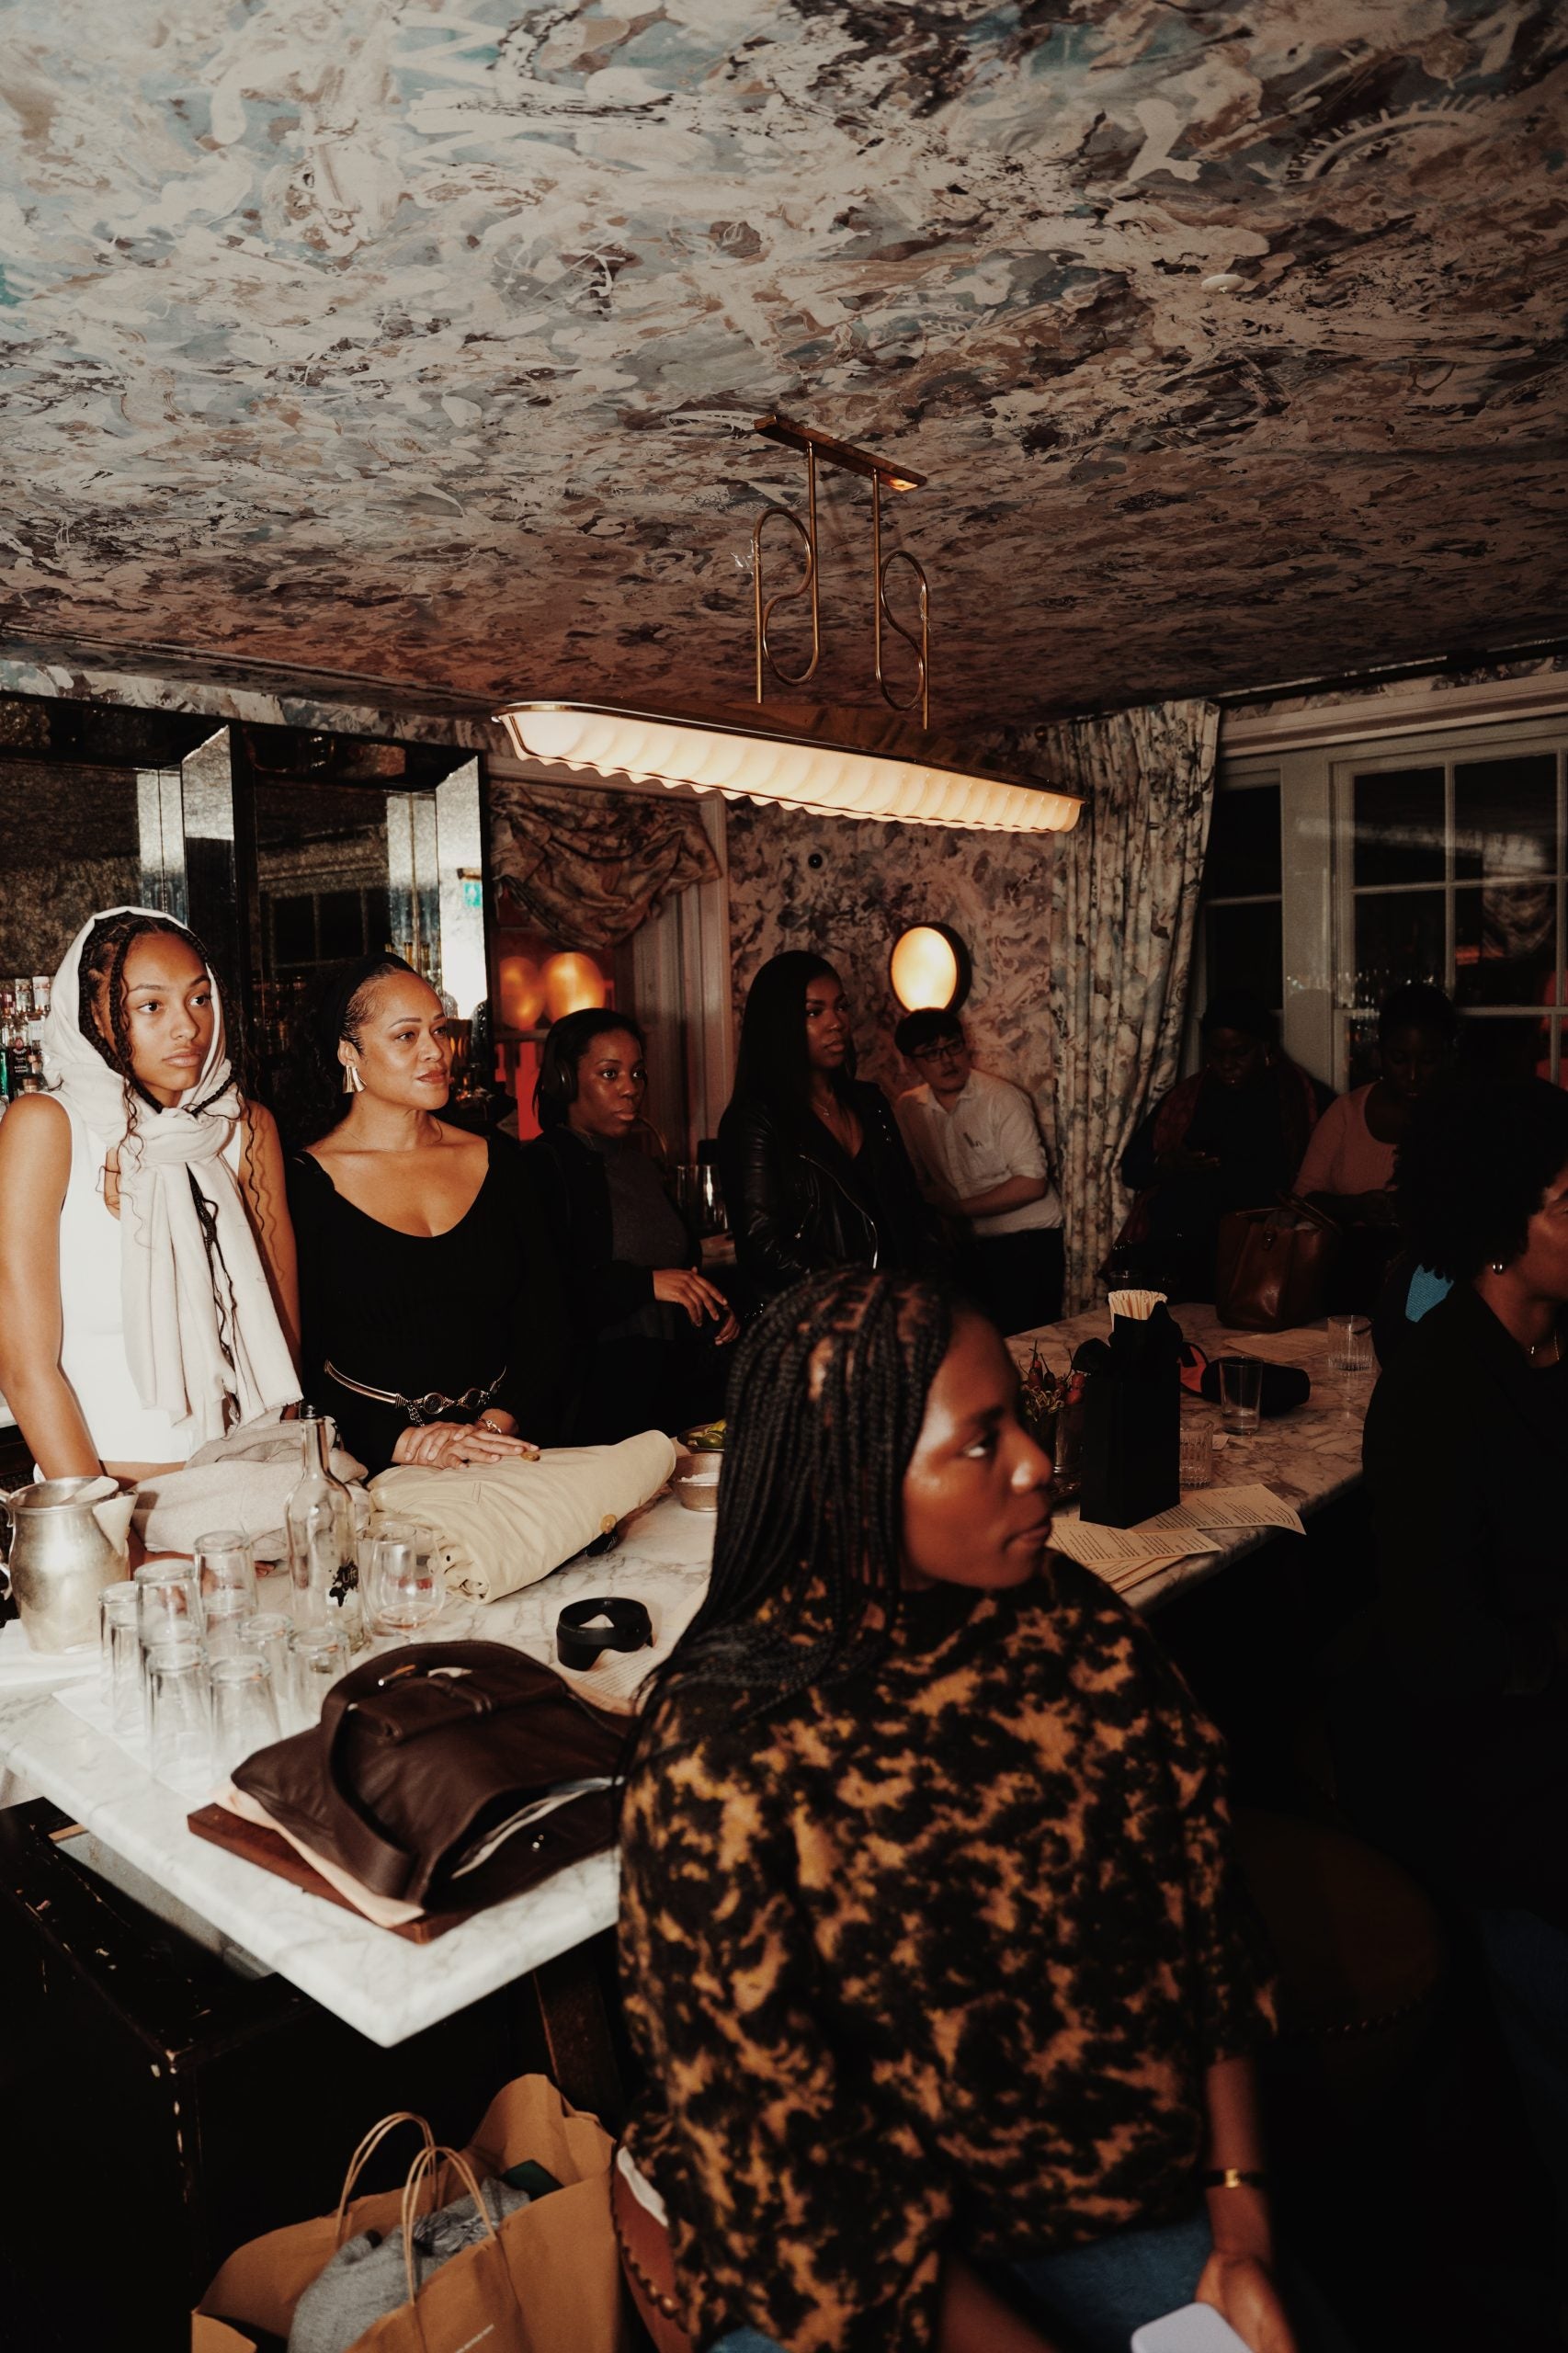 The Black Beauty Club Is Working To Uplift Our Community